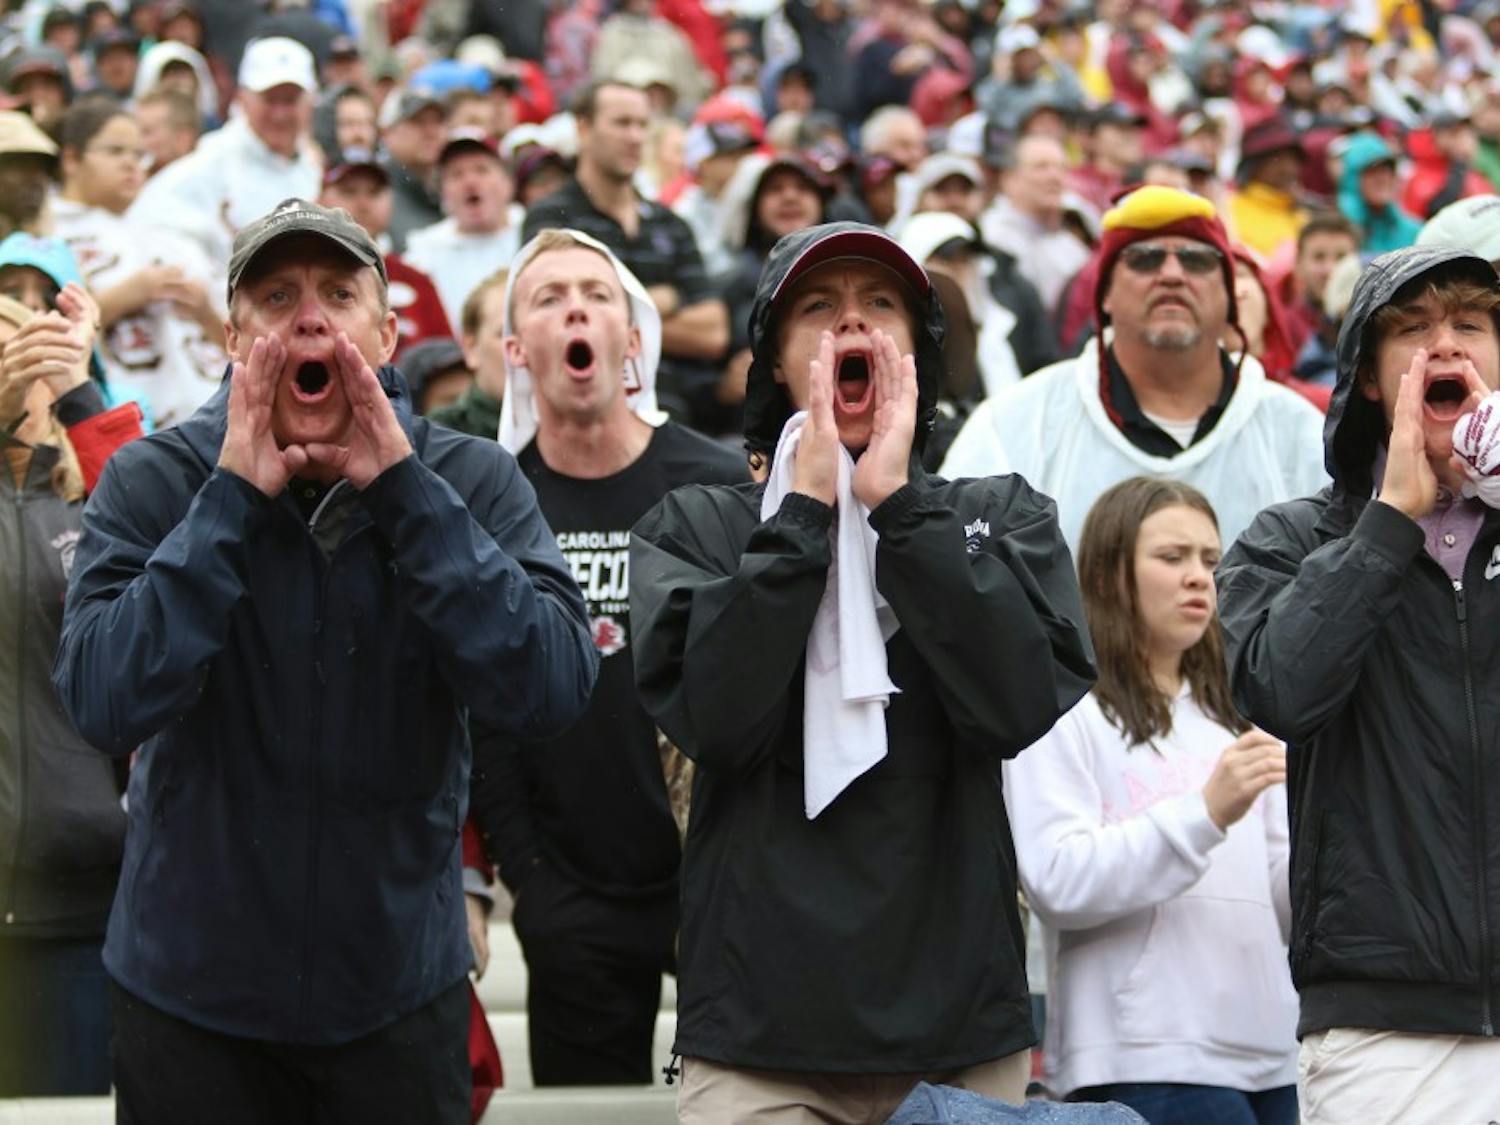 Fans boo in protest of the referees' calls during the game against Florida at Williams-Brice Stadium Saturday.